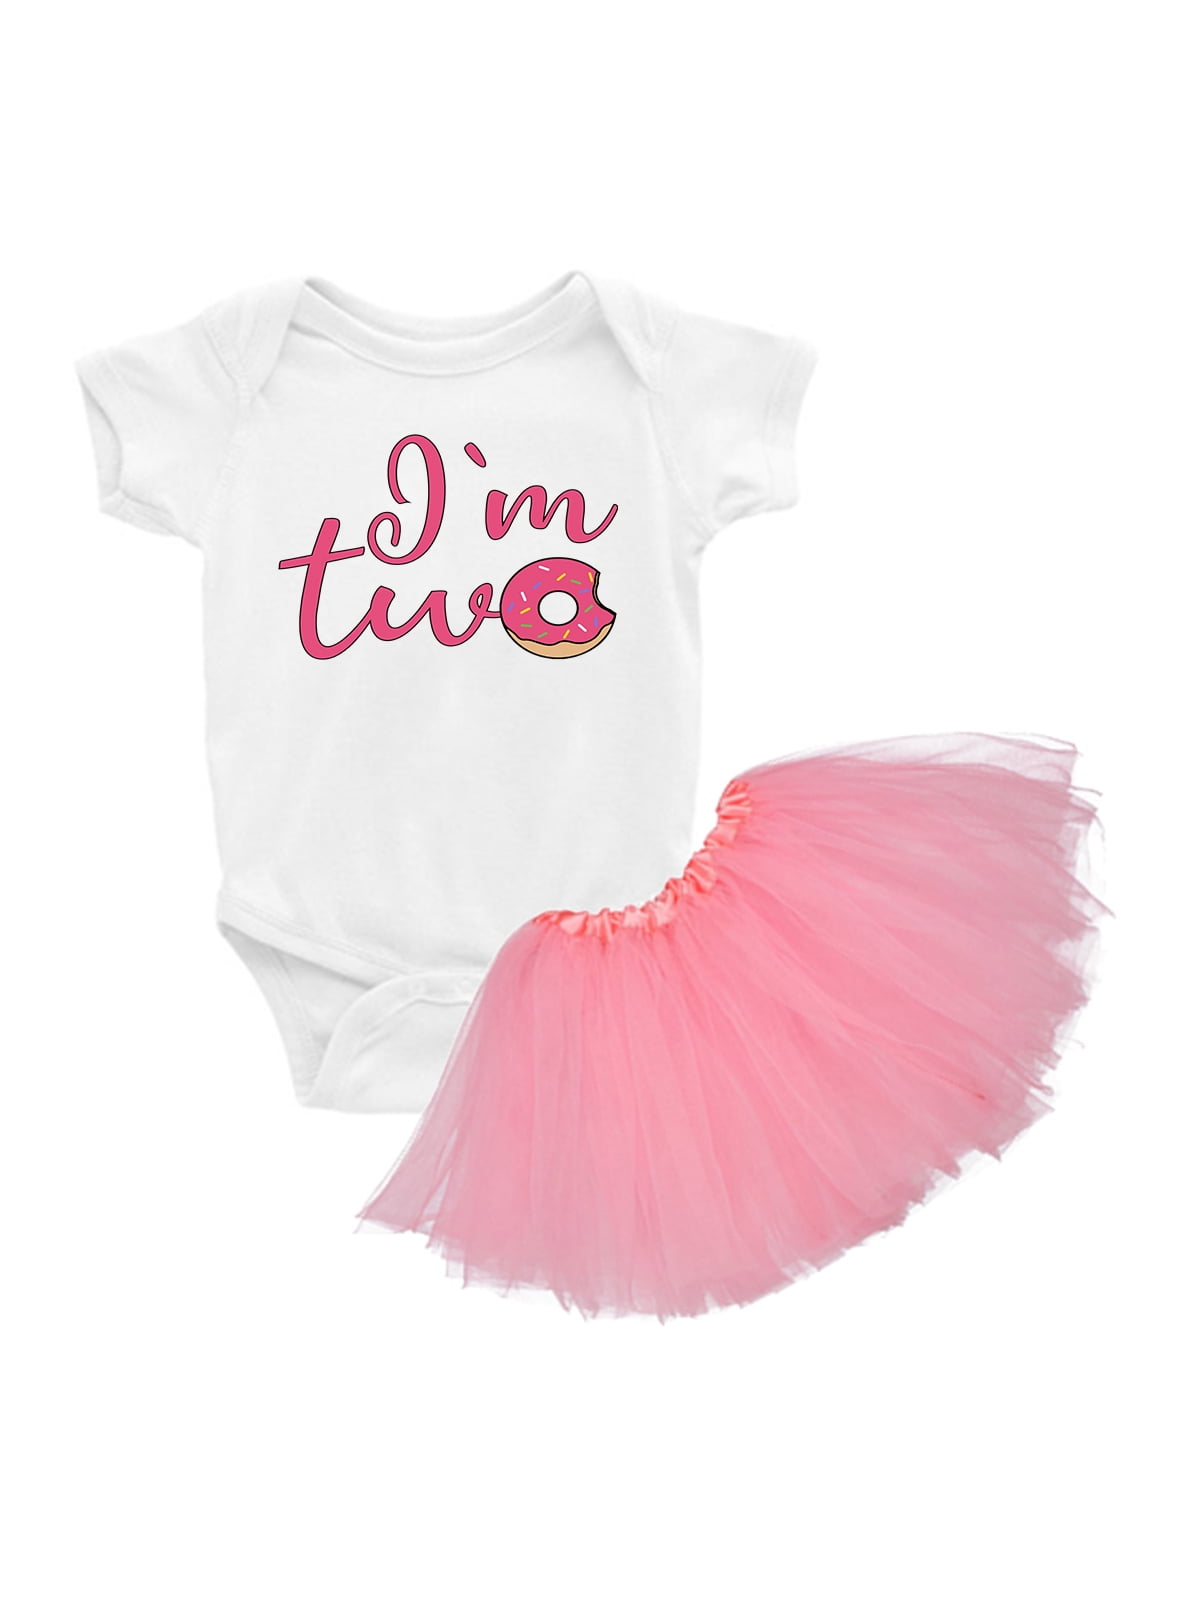 2nd birthday outfits for toddlers girl